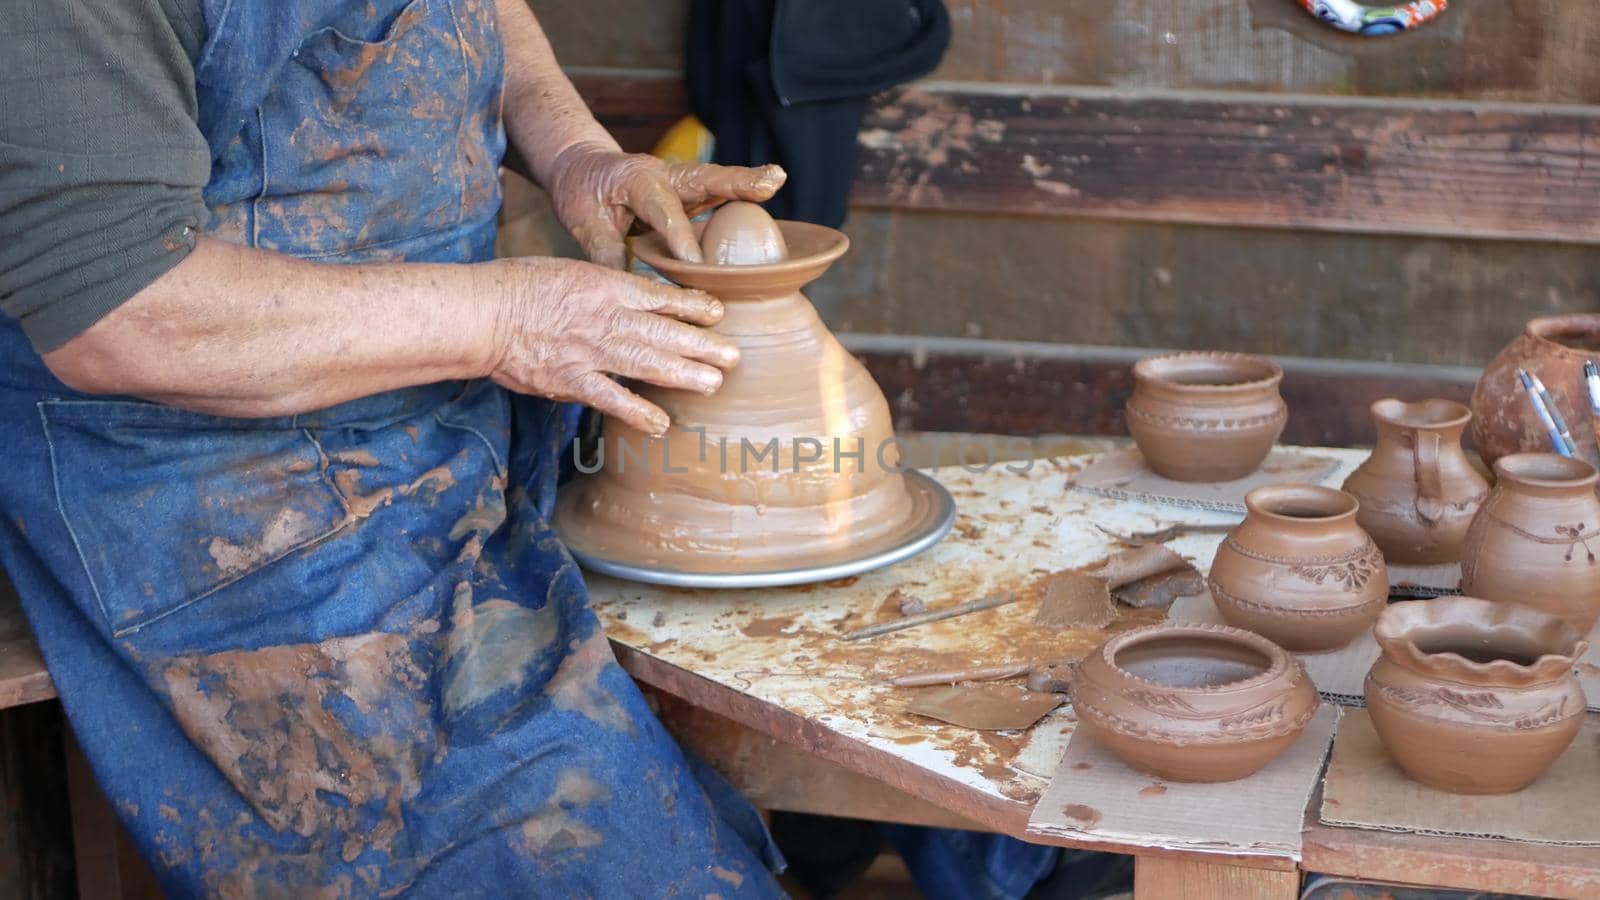 SAN DIEGO, CALIFORNIA USA - 5 JAN 2020: Potter working in mexican Oldtown, raw clay on pottery wheel. Man's hands, ceramist in process of modeling handcrafted clayware. Craftsman creating ceramic.